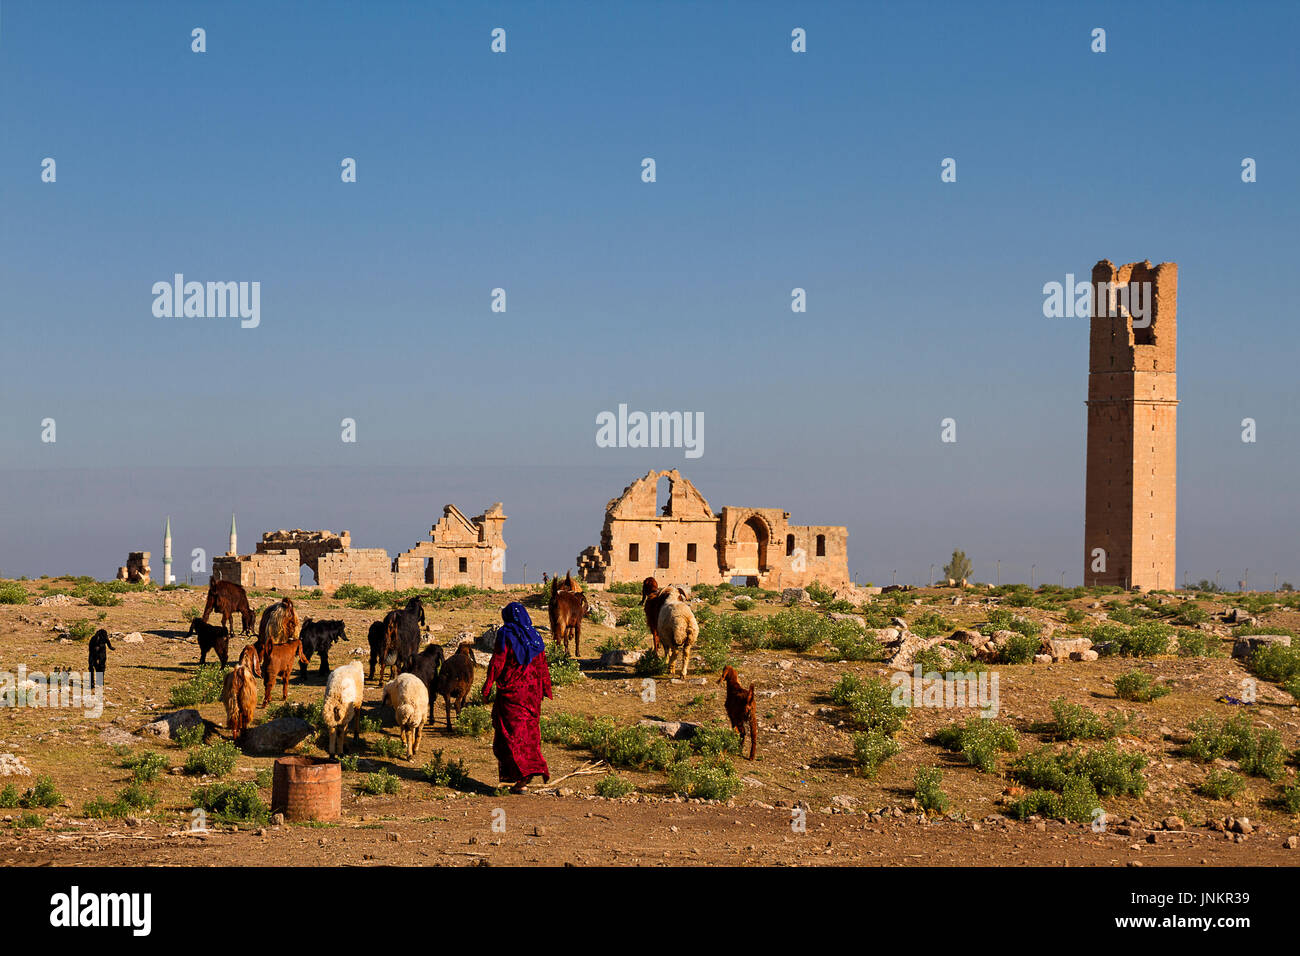 Local shepherdess with the ruins of the ancient city of Harran in the background, Sanliurfa, Turkey. Stock Photo